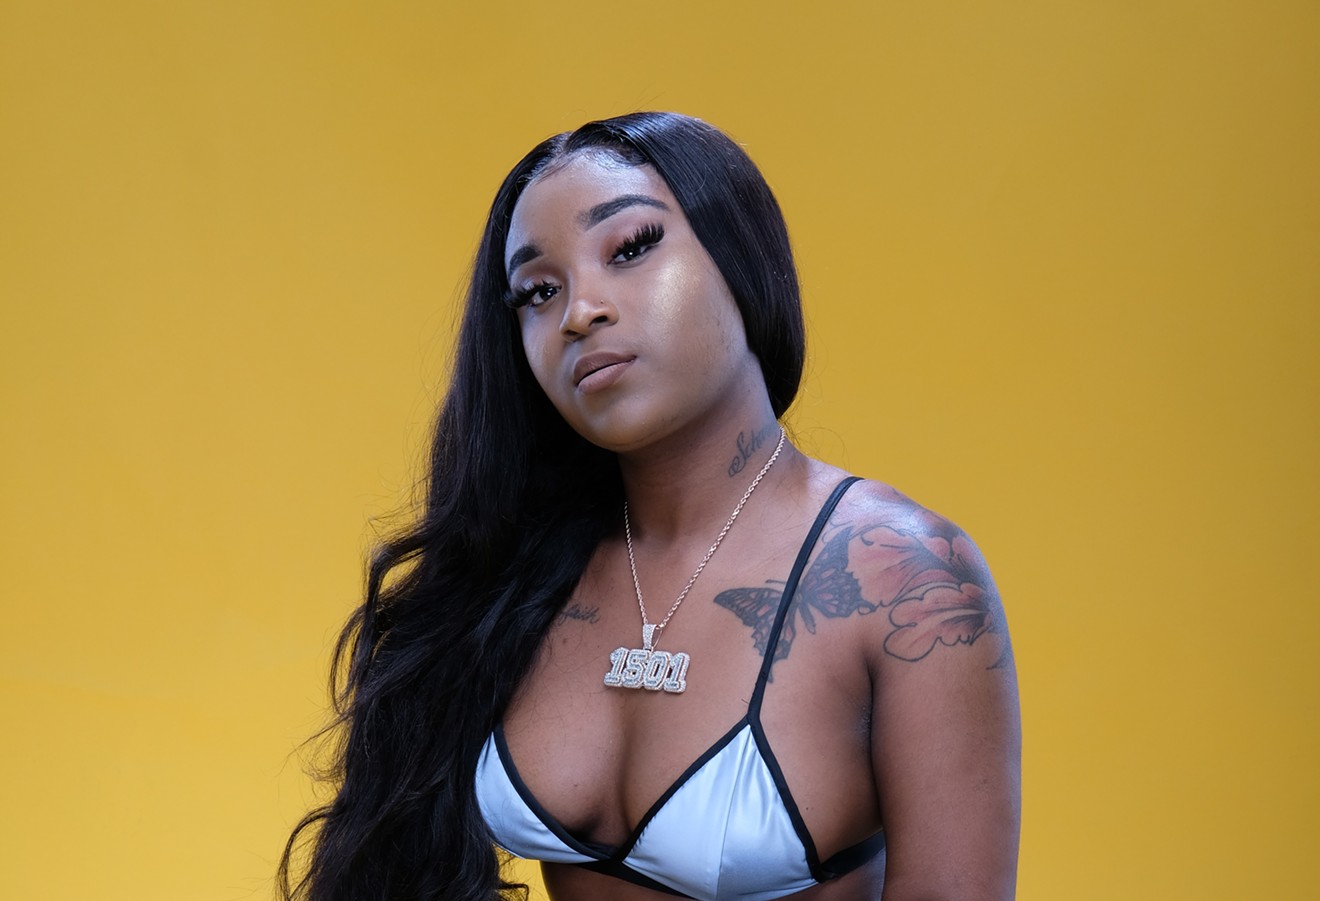 Erica Banks is the next big female rapper from Texas.